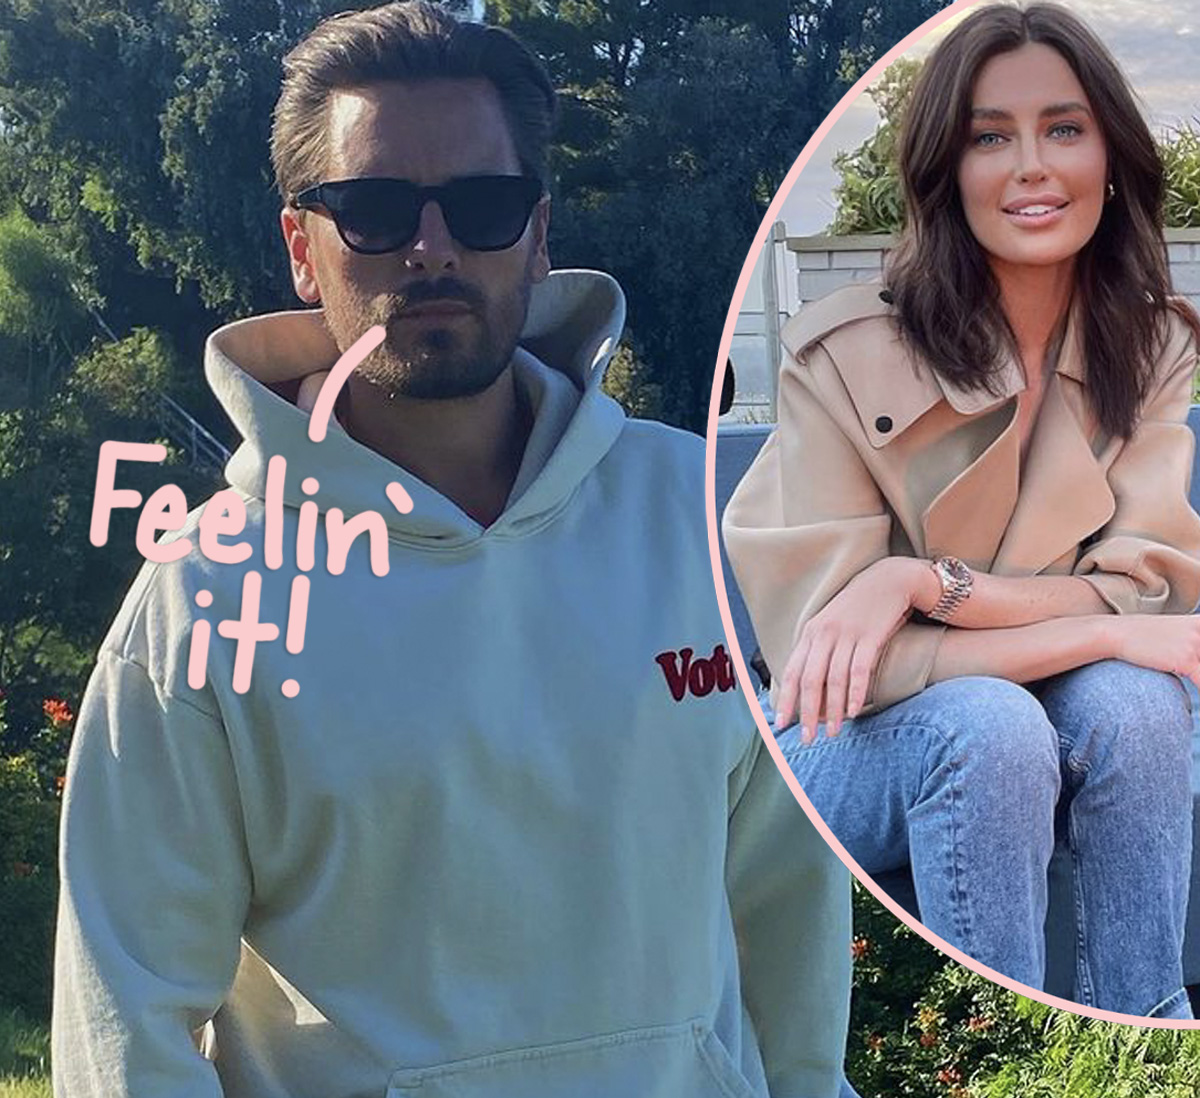 Scott Disick Wants To Settle Down And Cut Ties With Other Women To